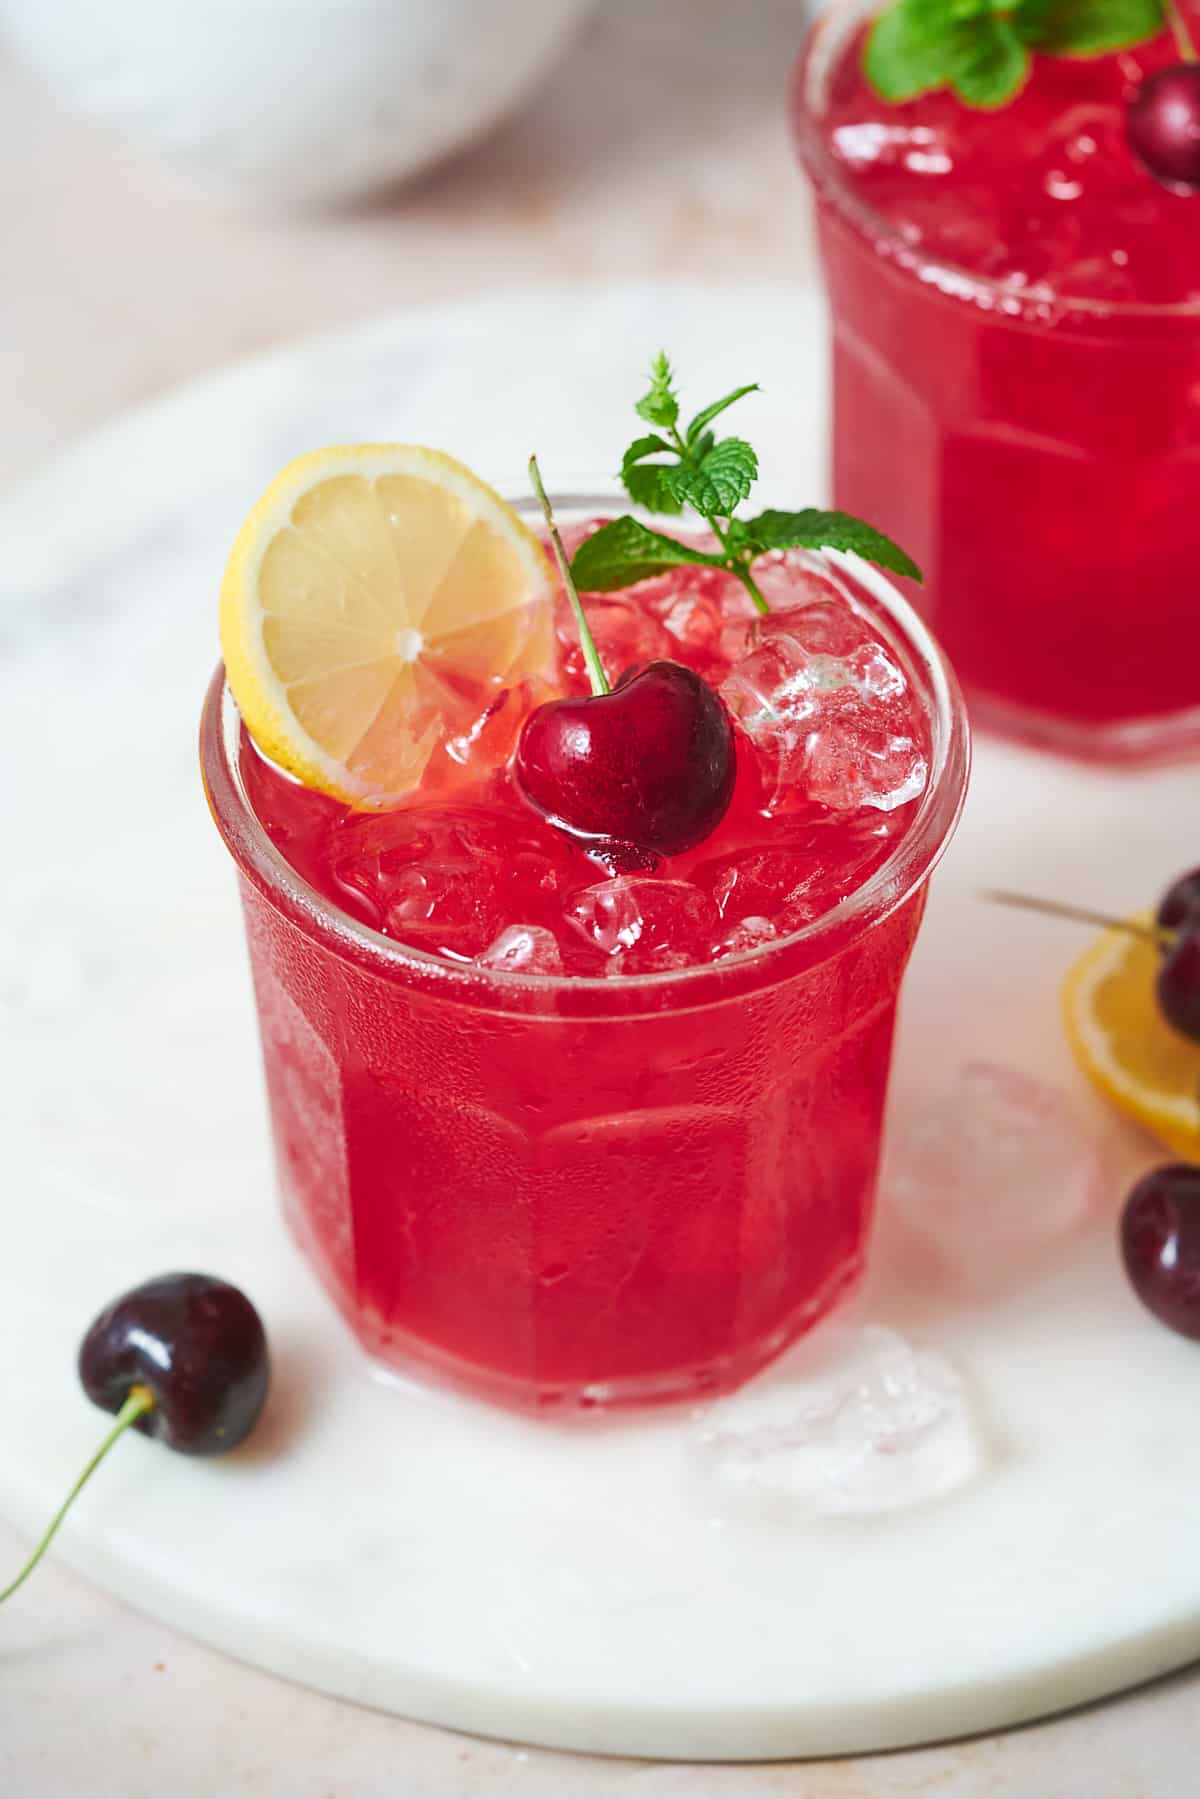 cherry lemonade in a cute jar, topped with a mint sprig, fresh lemon slices and a cherry on a stem.